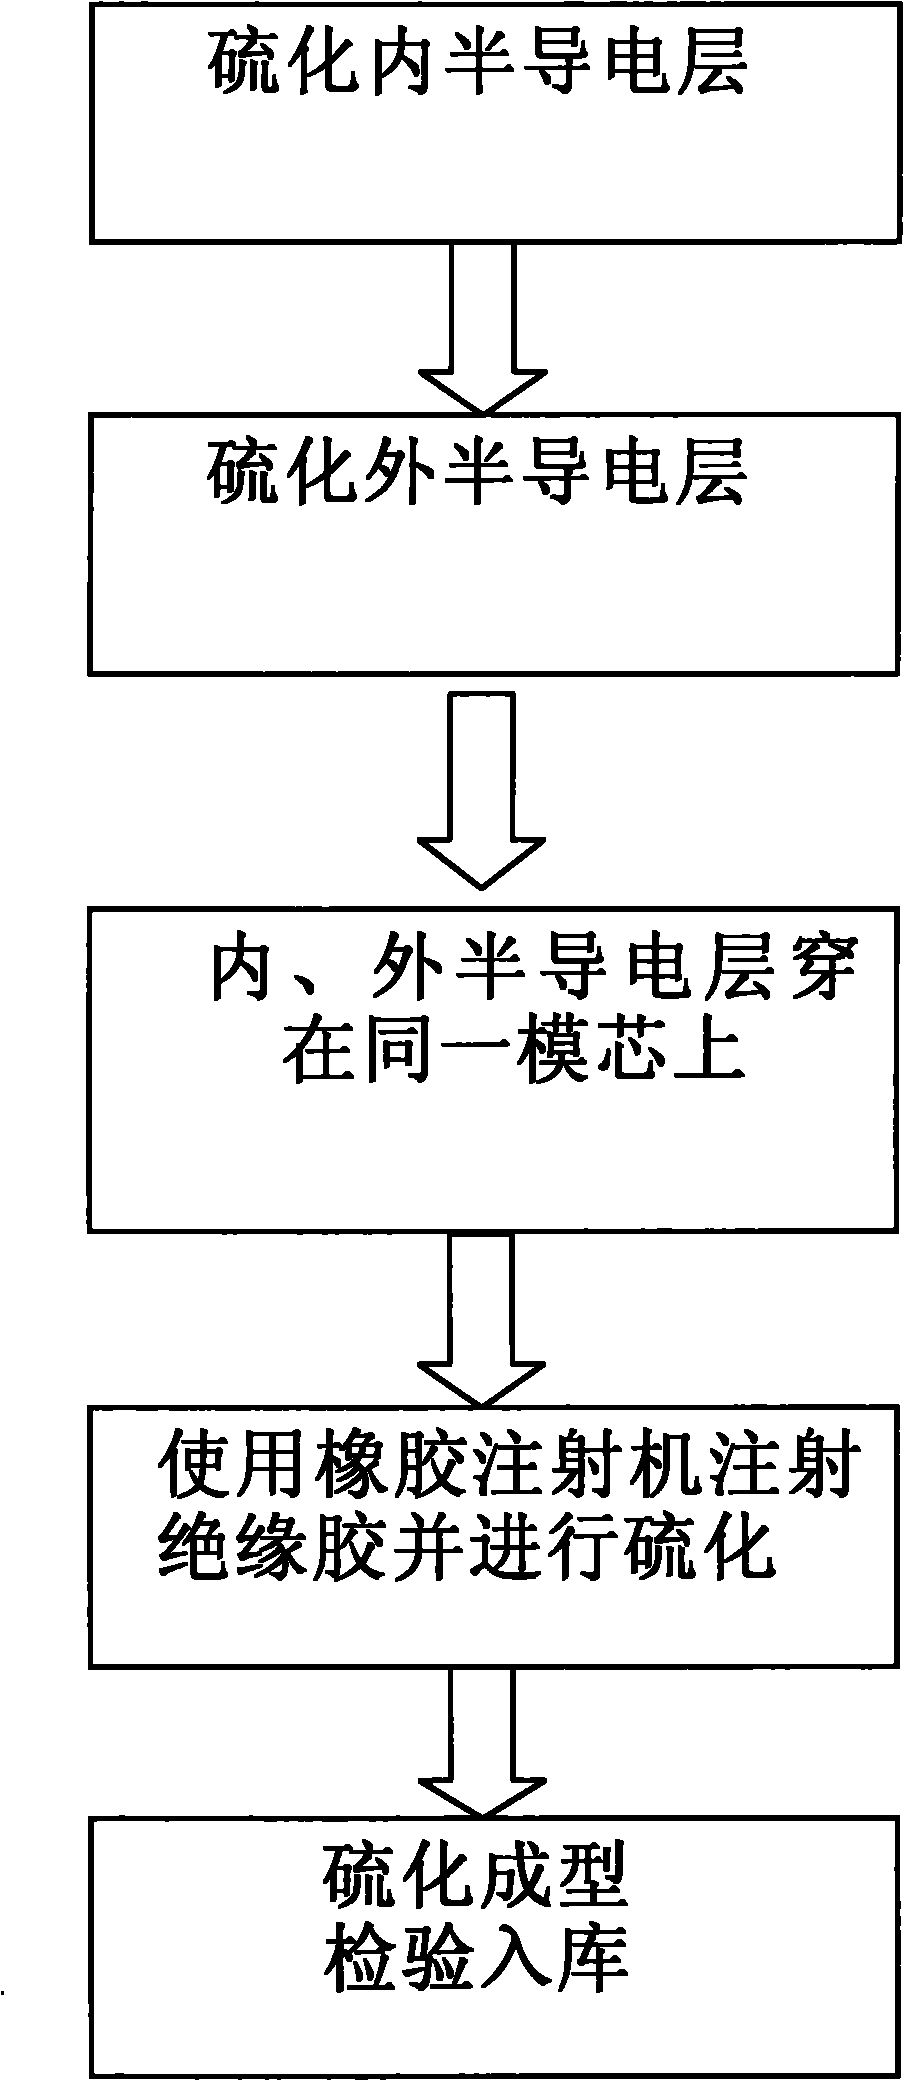 Preparation method for rubber cable connector